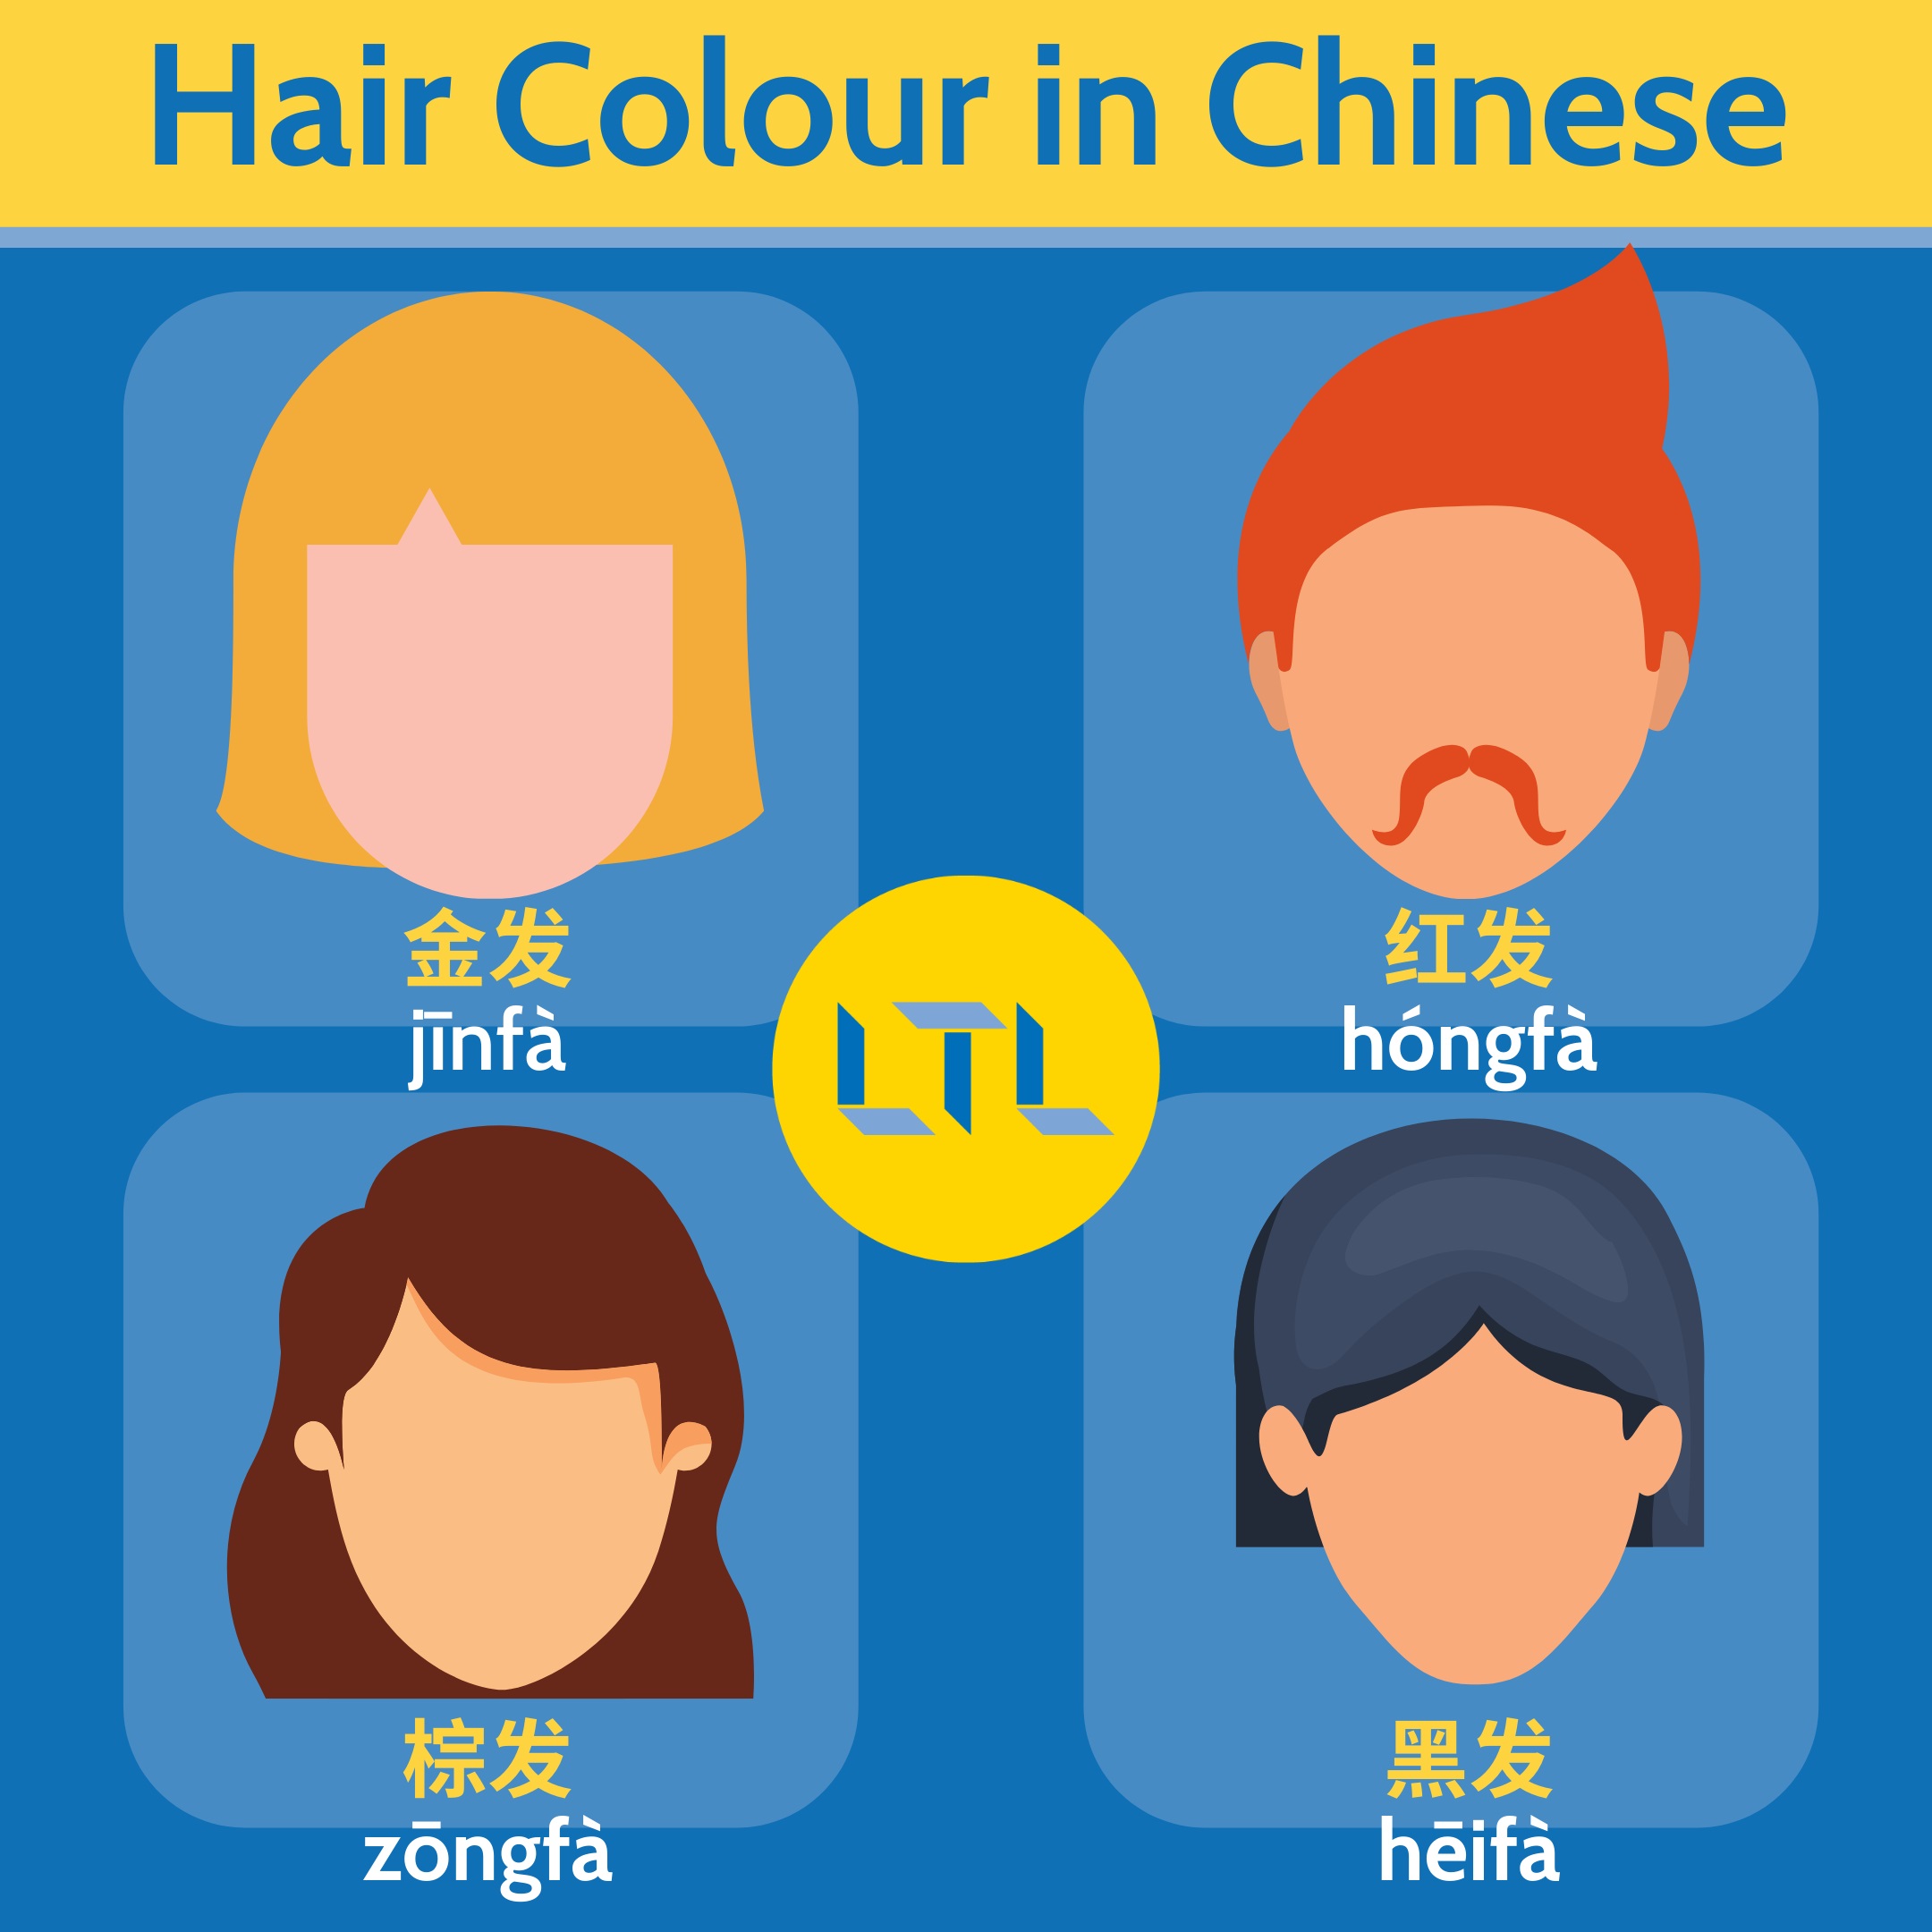 Hair Styles in Chinese